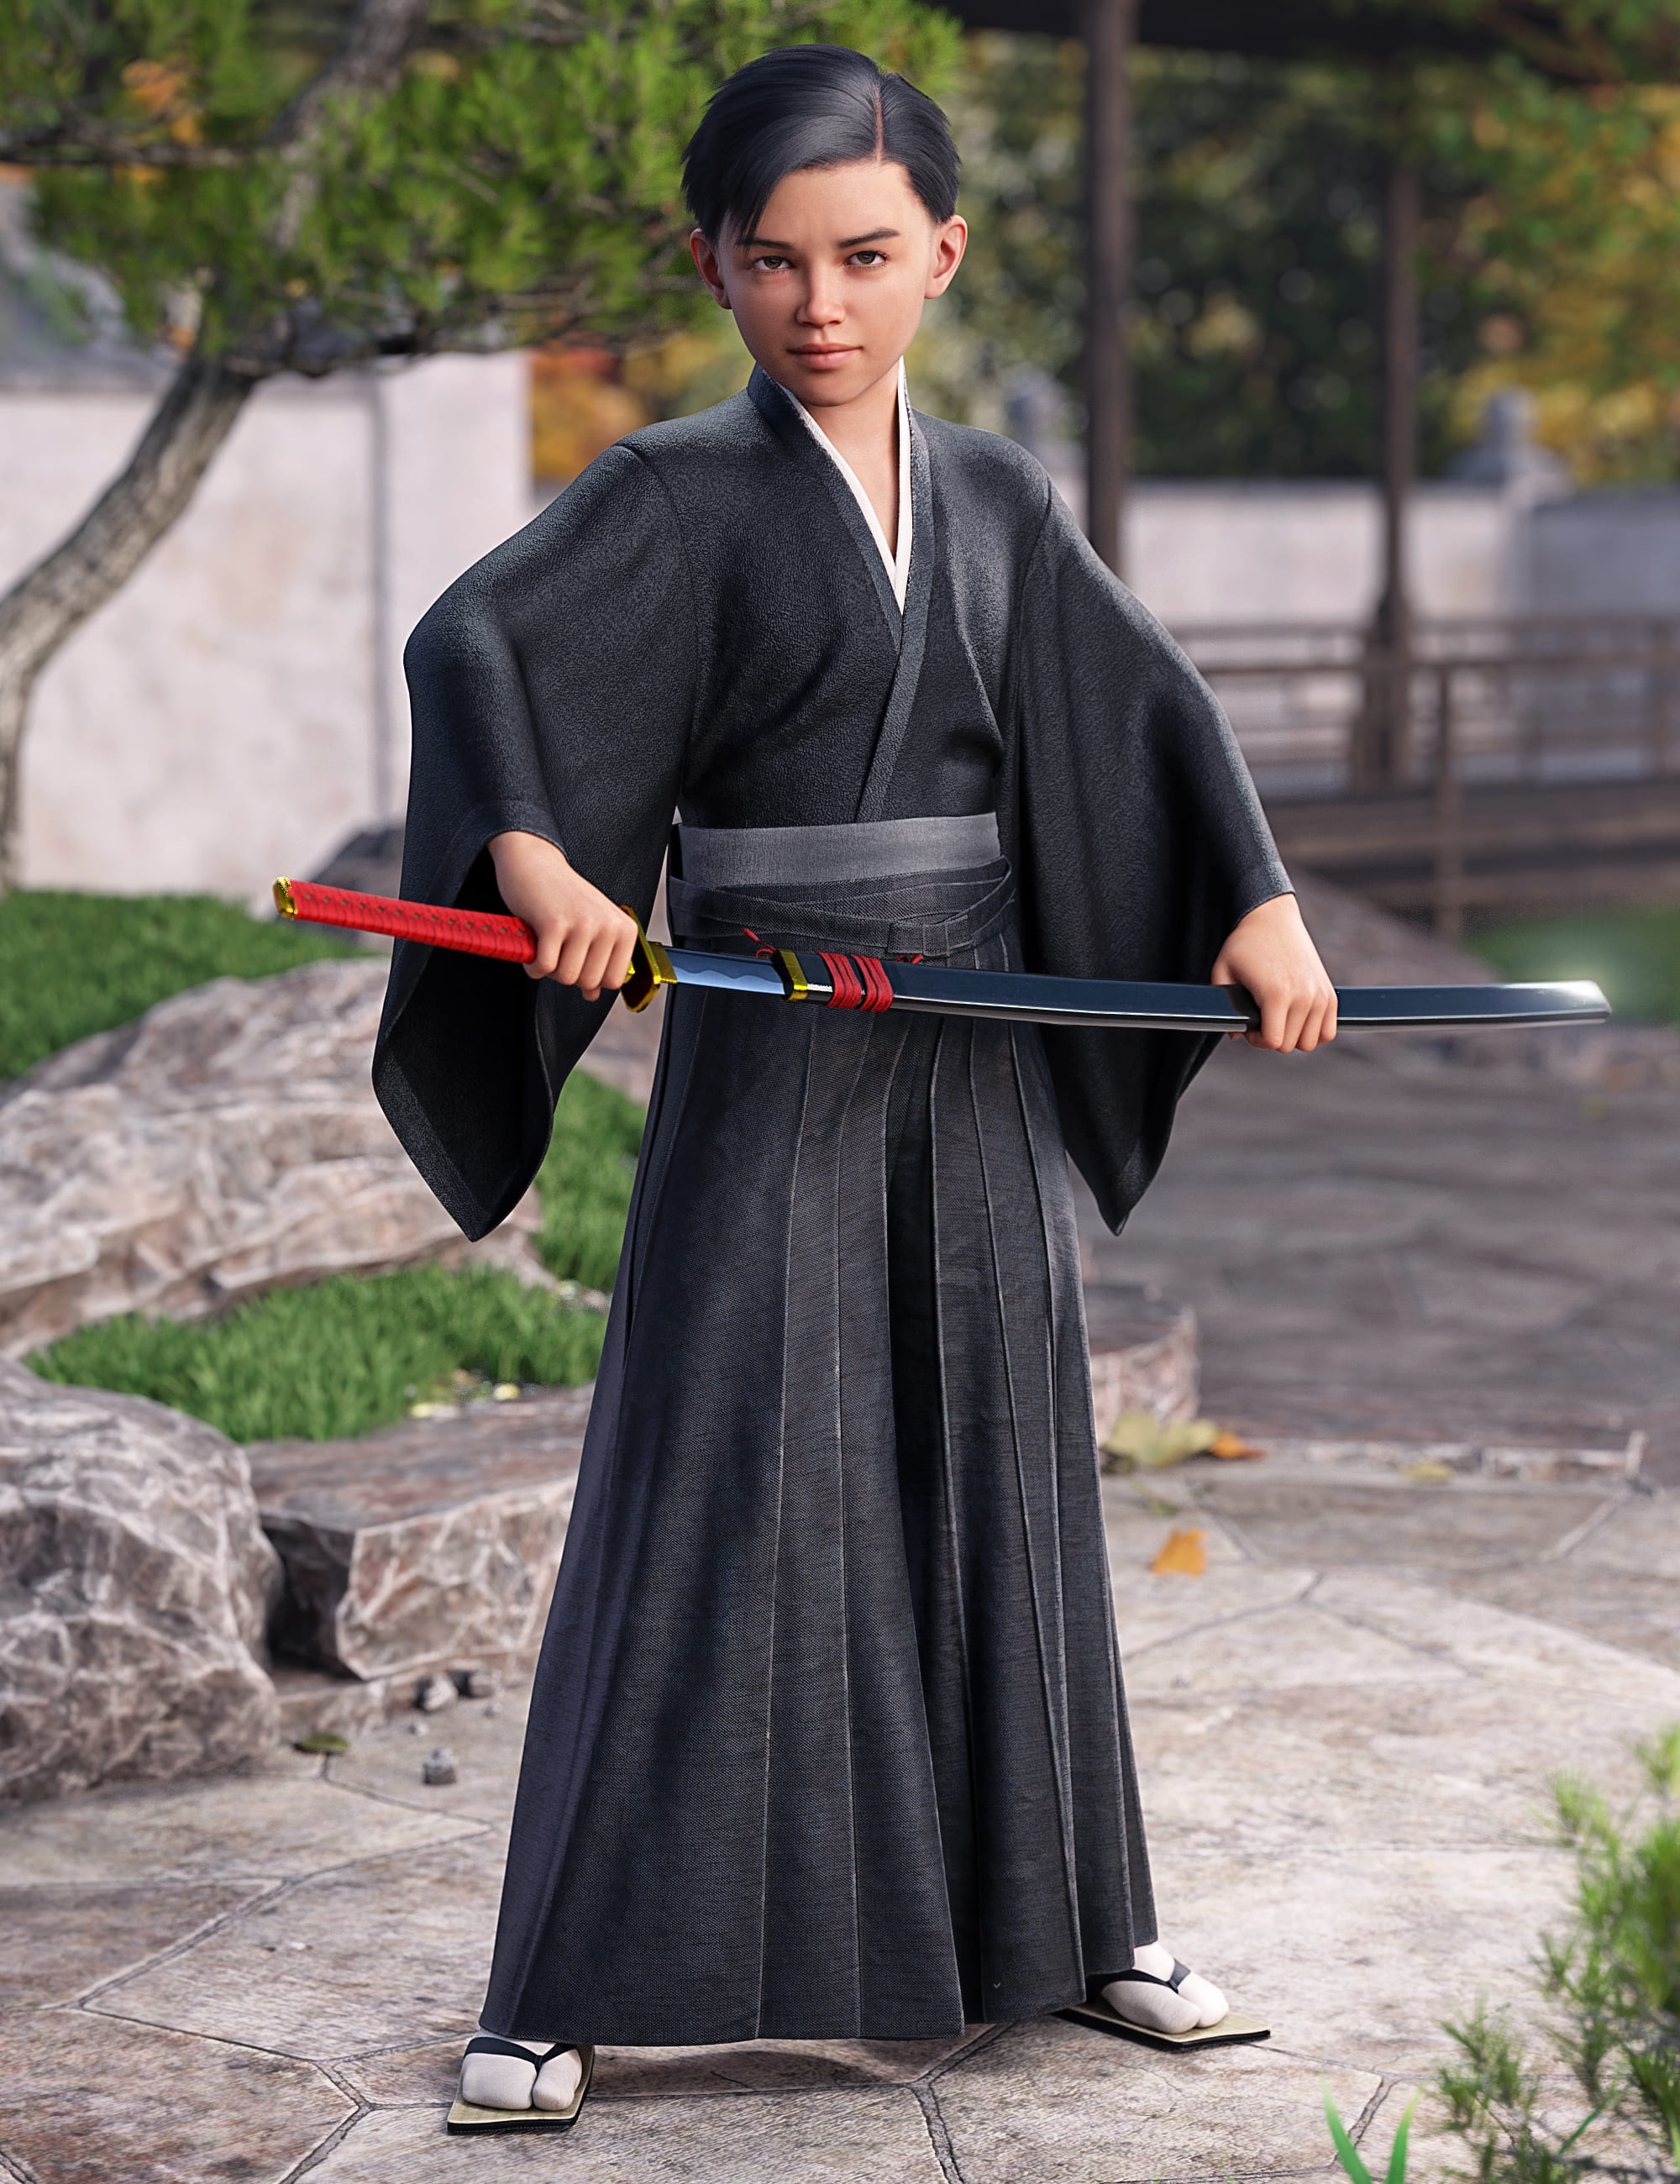 dForce Hakama and Kimono Outfit for Genesis 8.1 Male_DAZ3D下载站